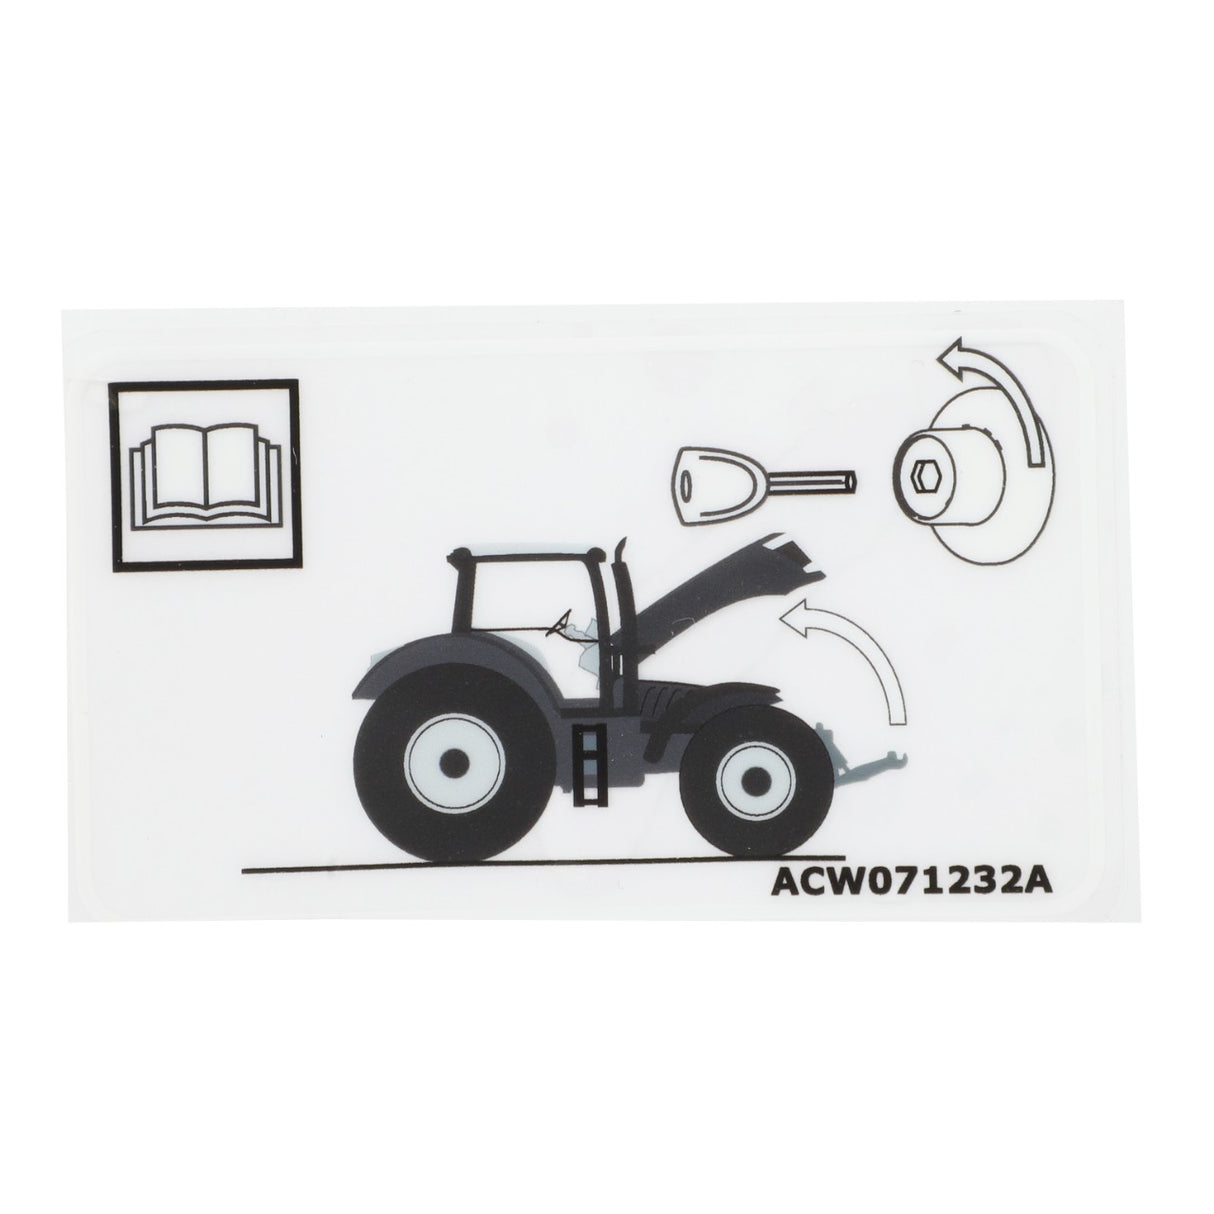 AGCO | Safety Decal - Acw071232A - Farming Parts